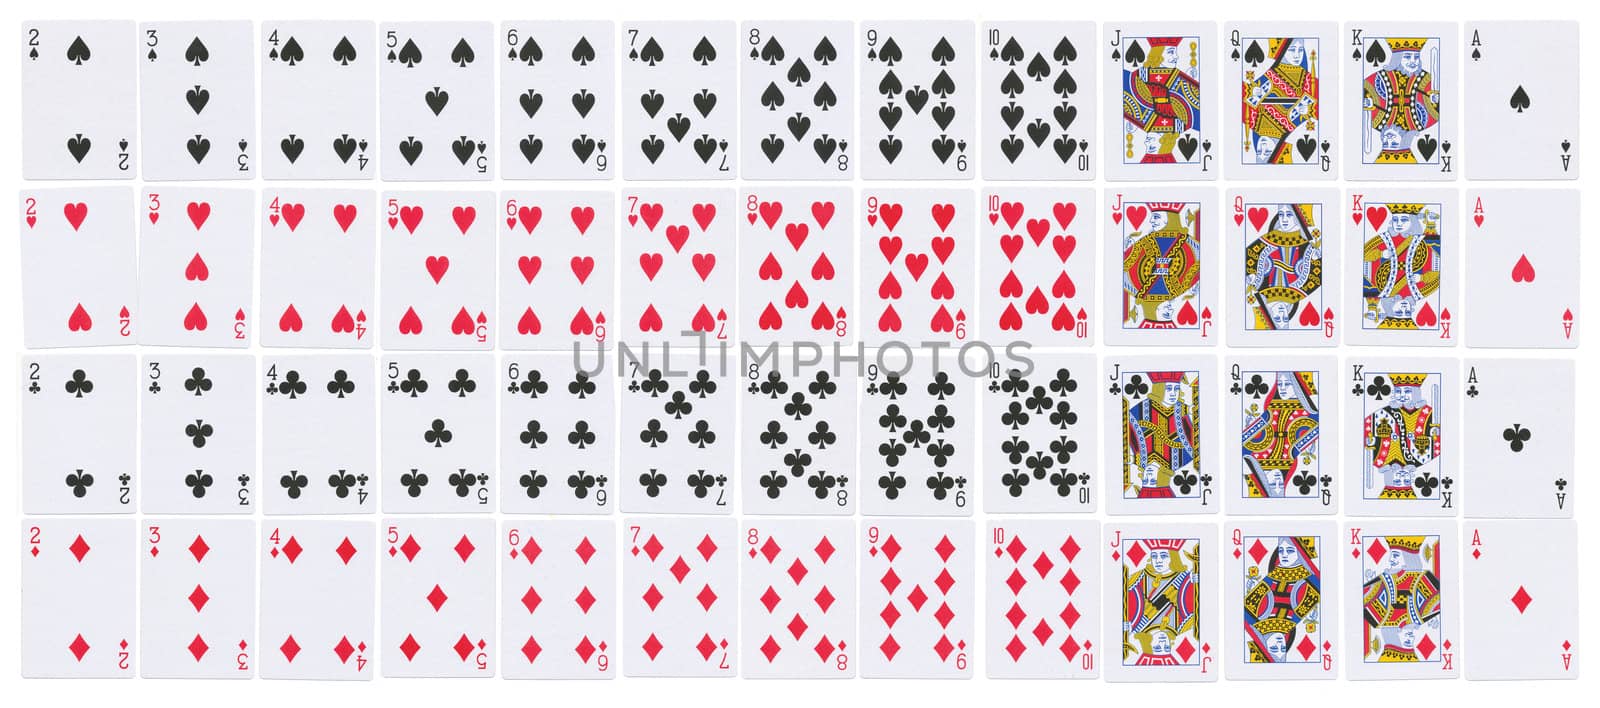 Deck of cards full resolution by jeremywhat